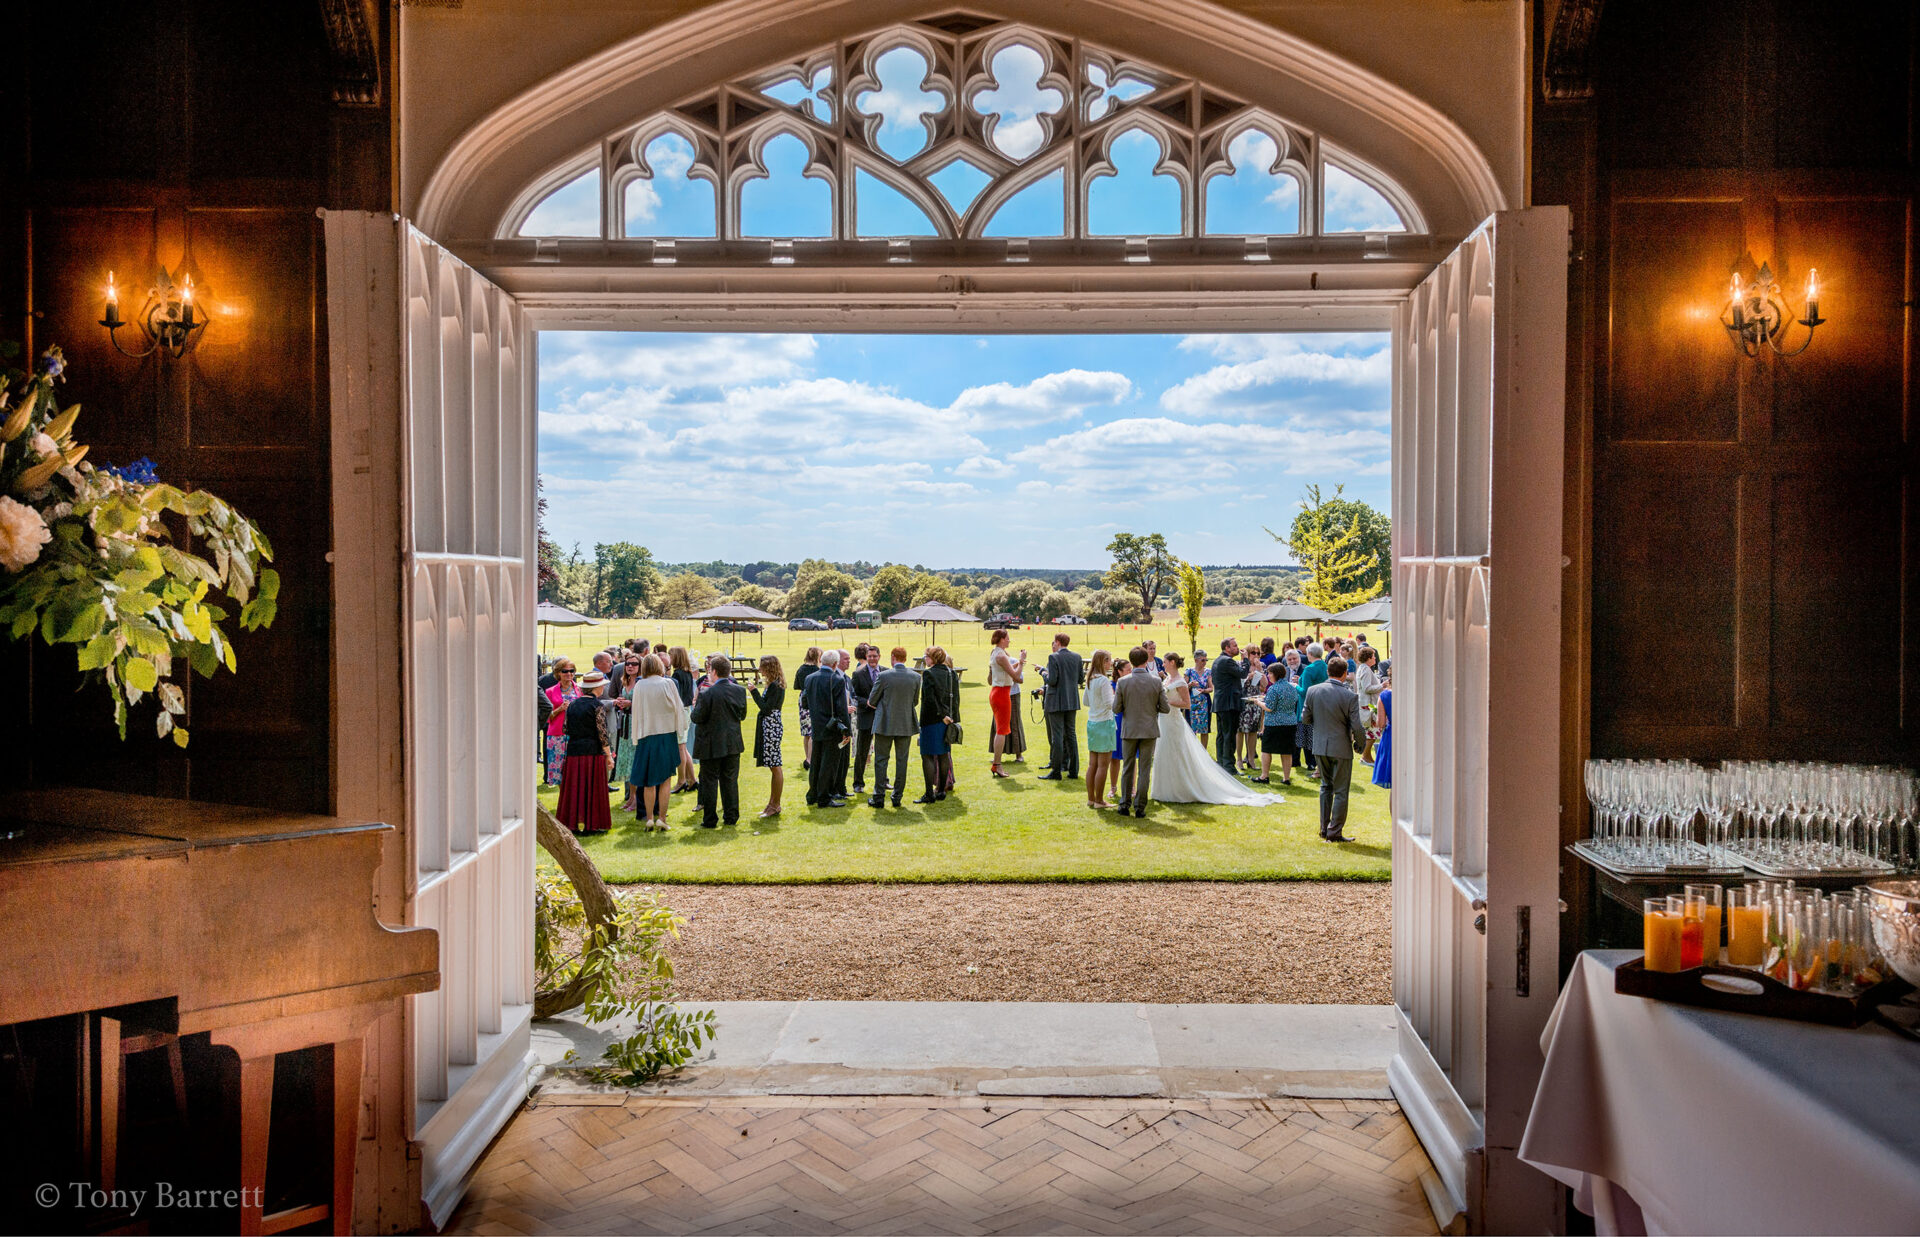 A wedding celebration taking place in the Cumberland Lodge gardens